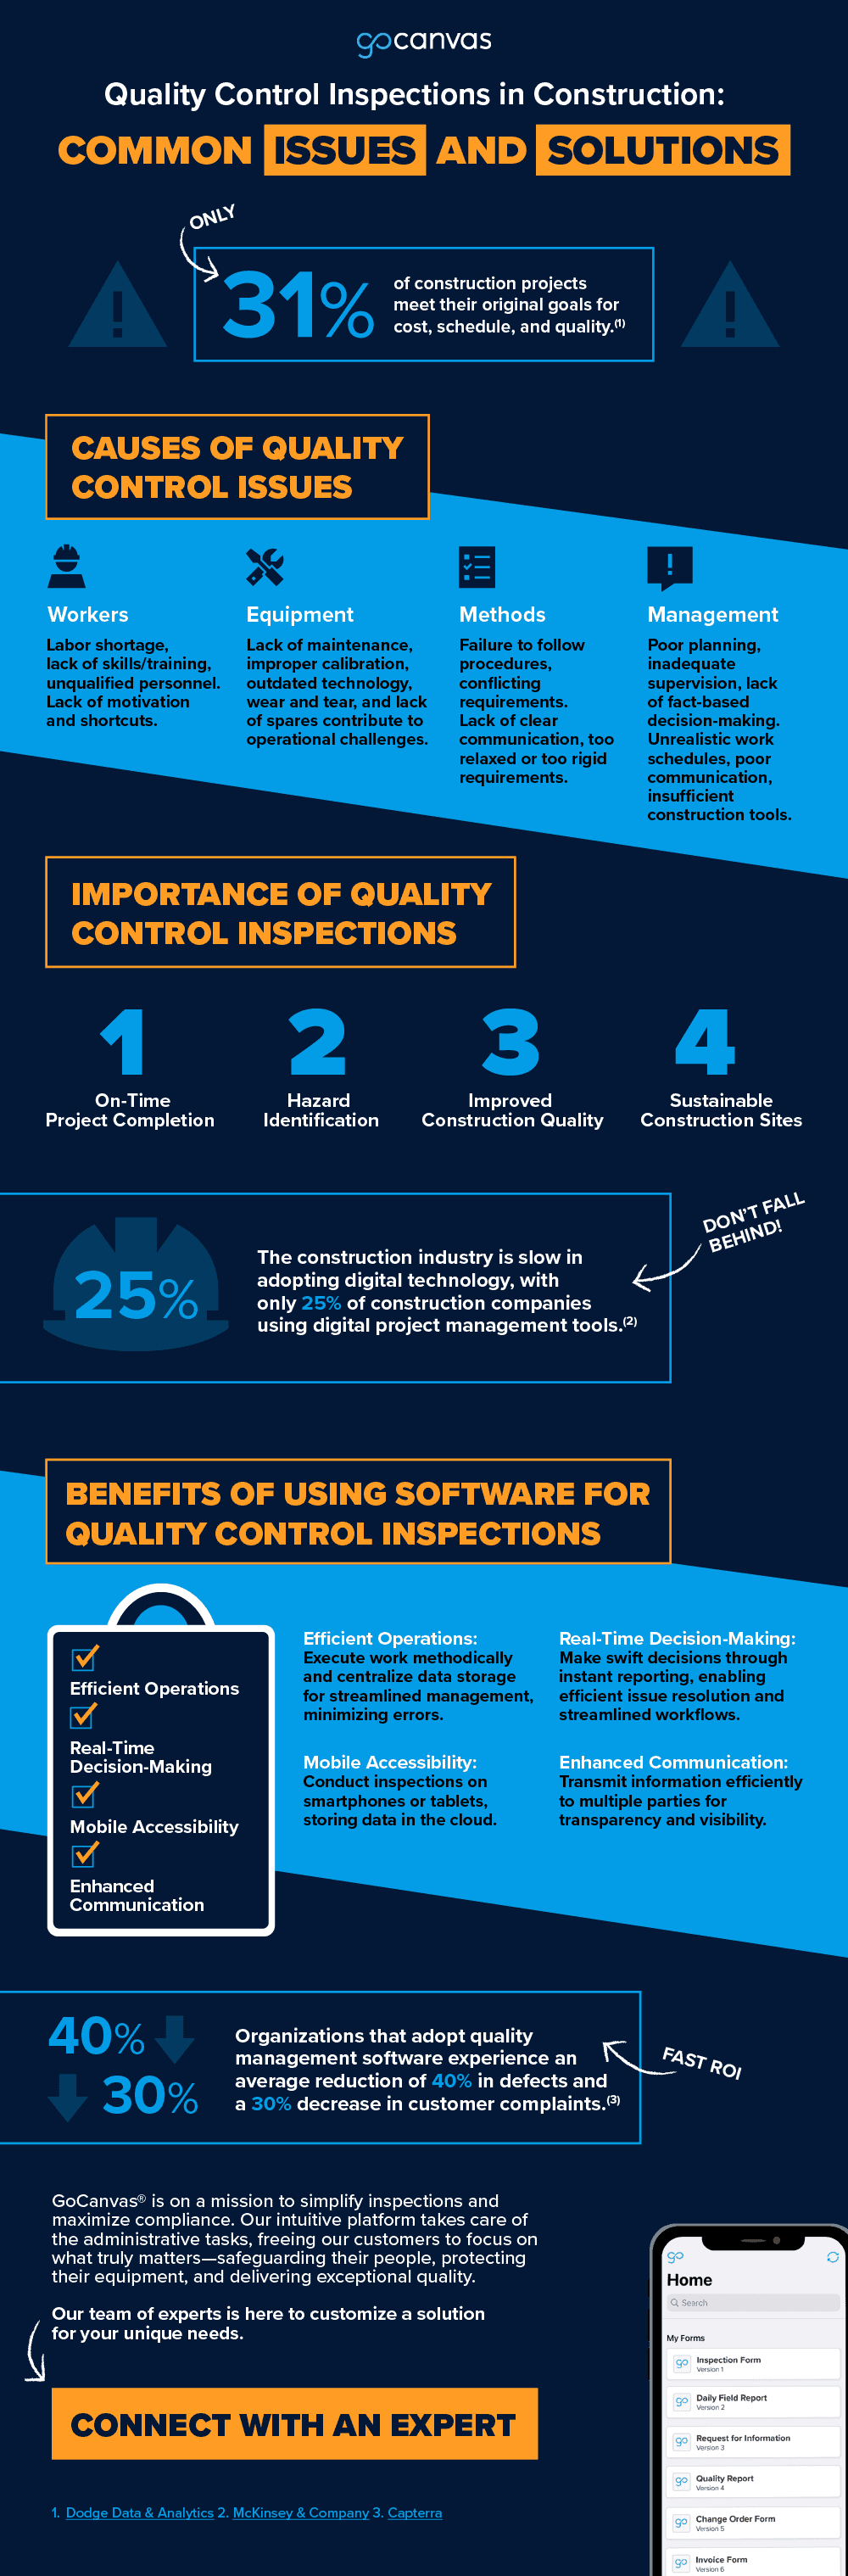 Infographic: Quality Control Inspections in Construction. Learn about the importance of software adoption for inspections.